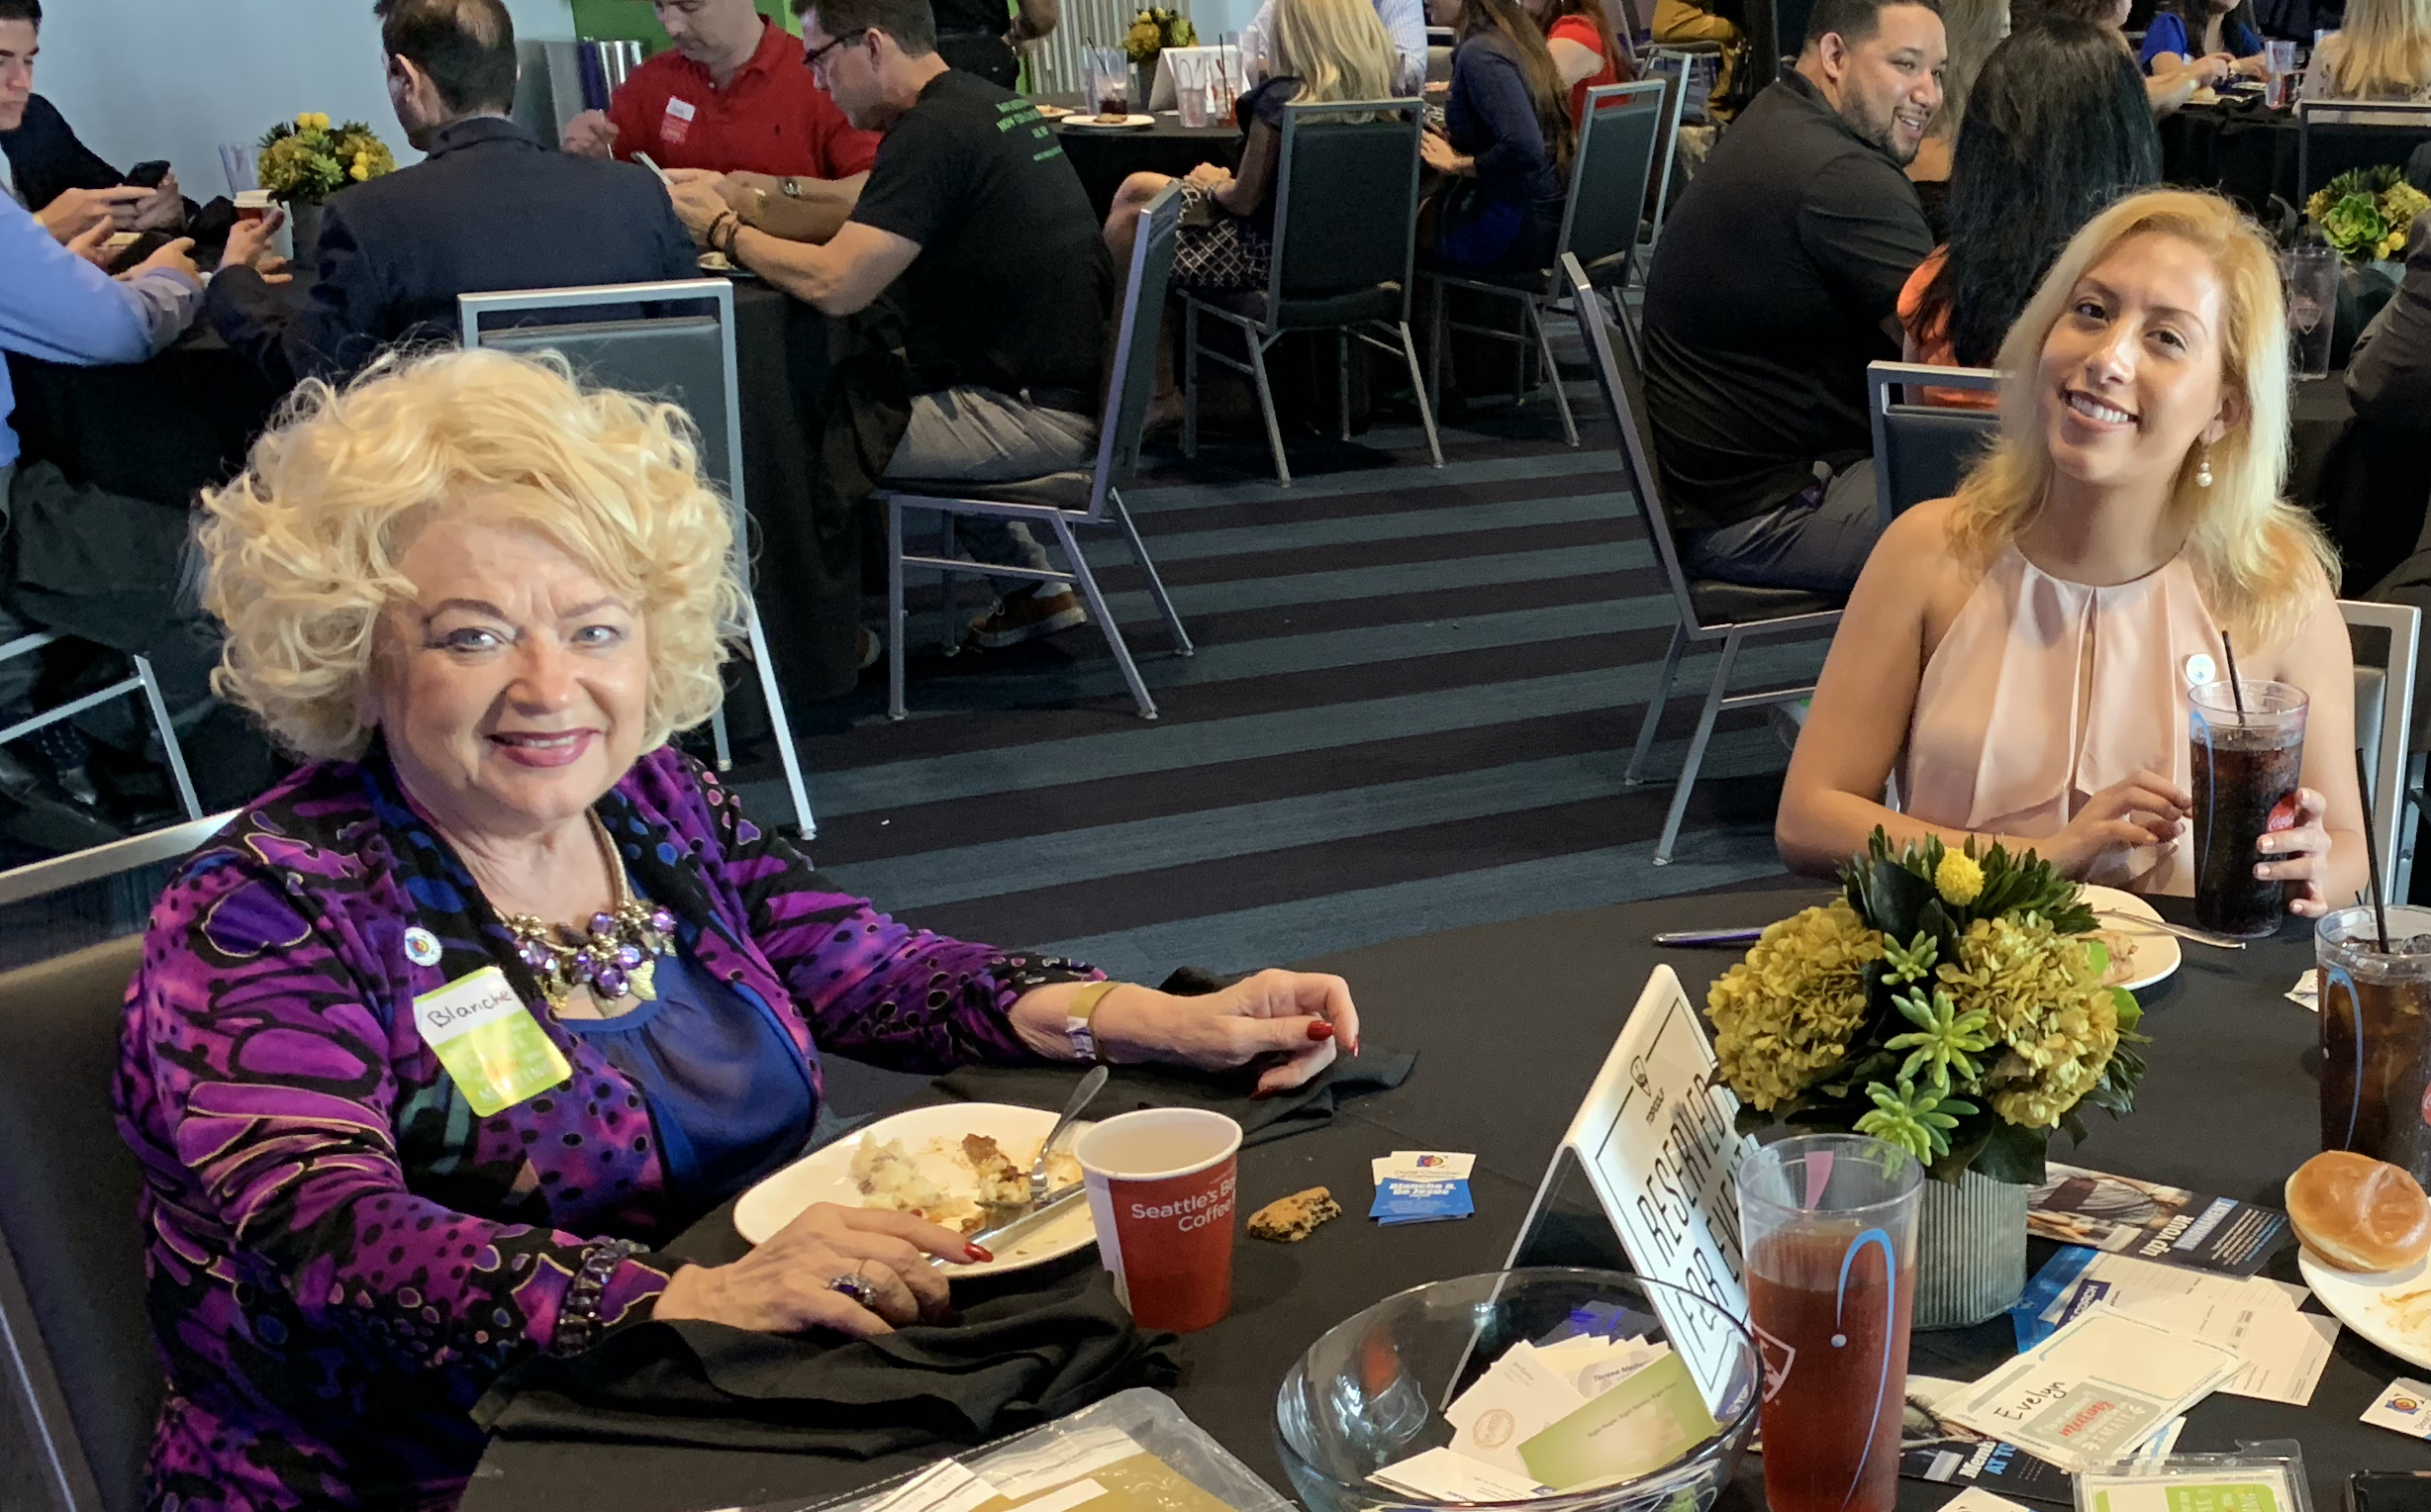 Doral Chamber of Commerce introduces Danielle Vargas and Blanche de Jesus to Topgolf Doral Networking Luncheon.